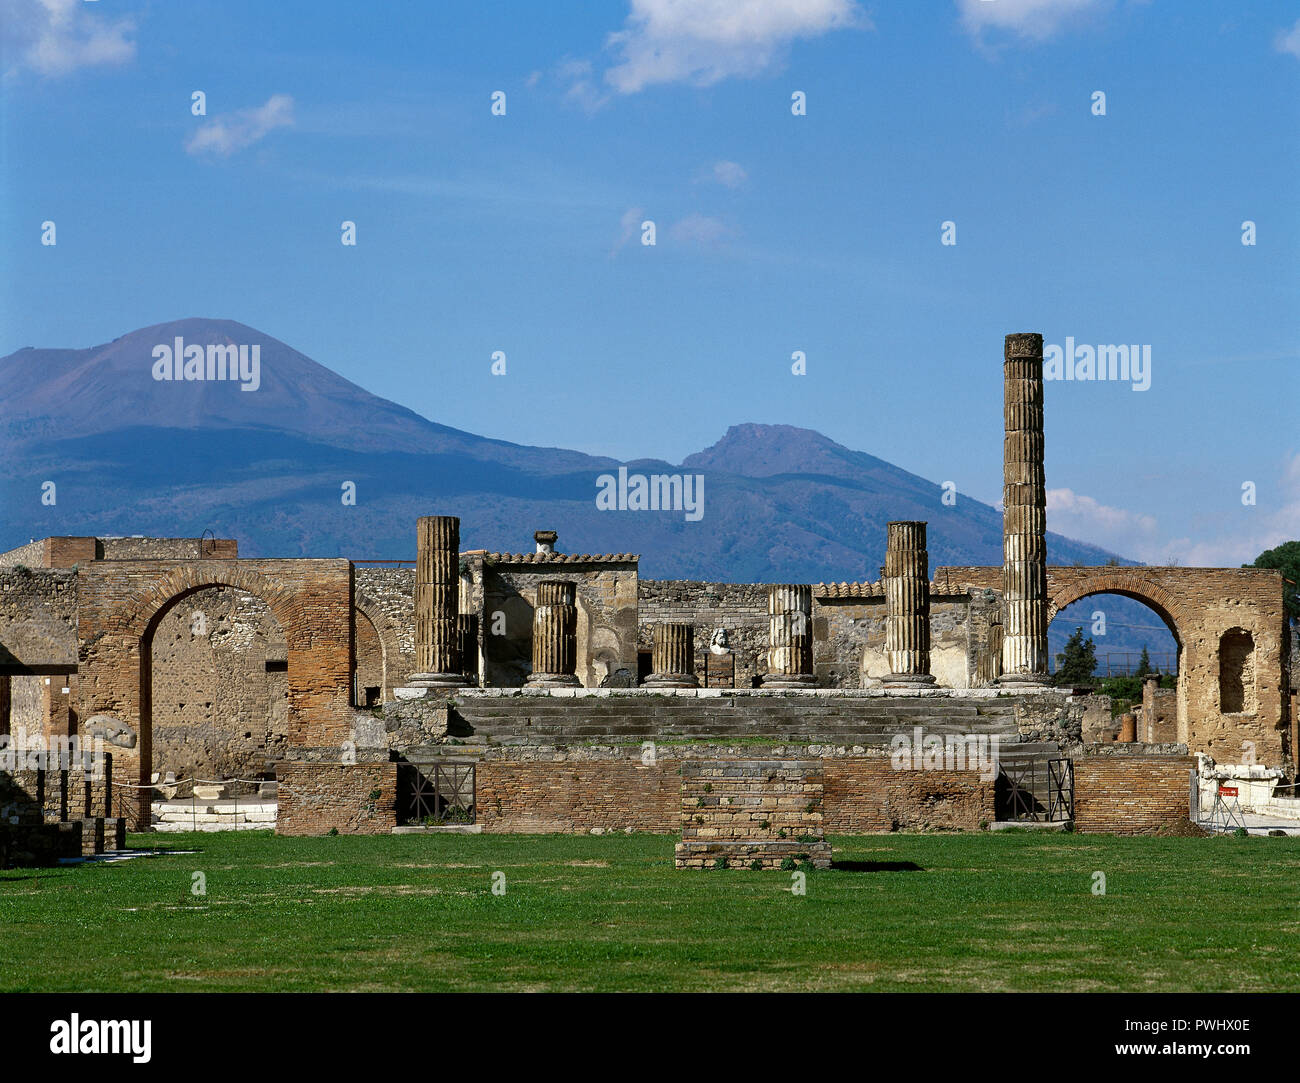 Italy. Pompeii. Roman city destroyed in 79 AD because of the eruption of the Vesuvius volcano. Temple of Jupiter (Fortuna Augusta) at the Forum. Remains of the Doric columns. La Campania. Stock Photo